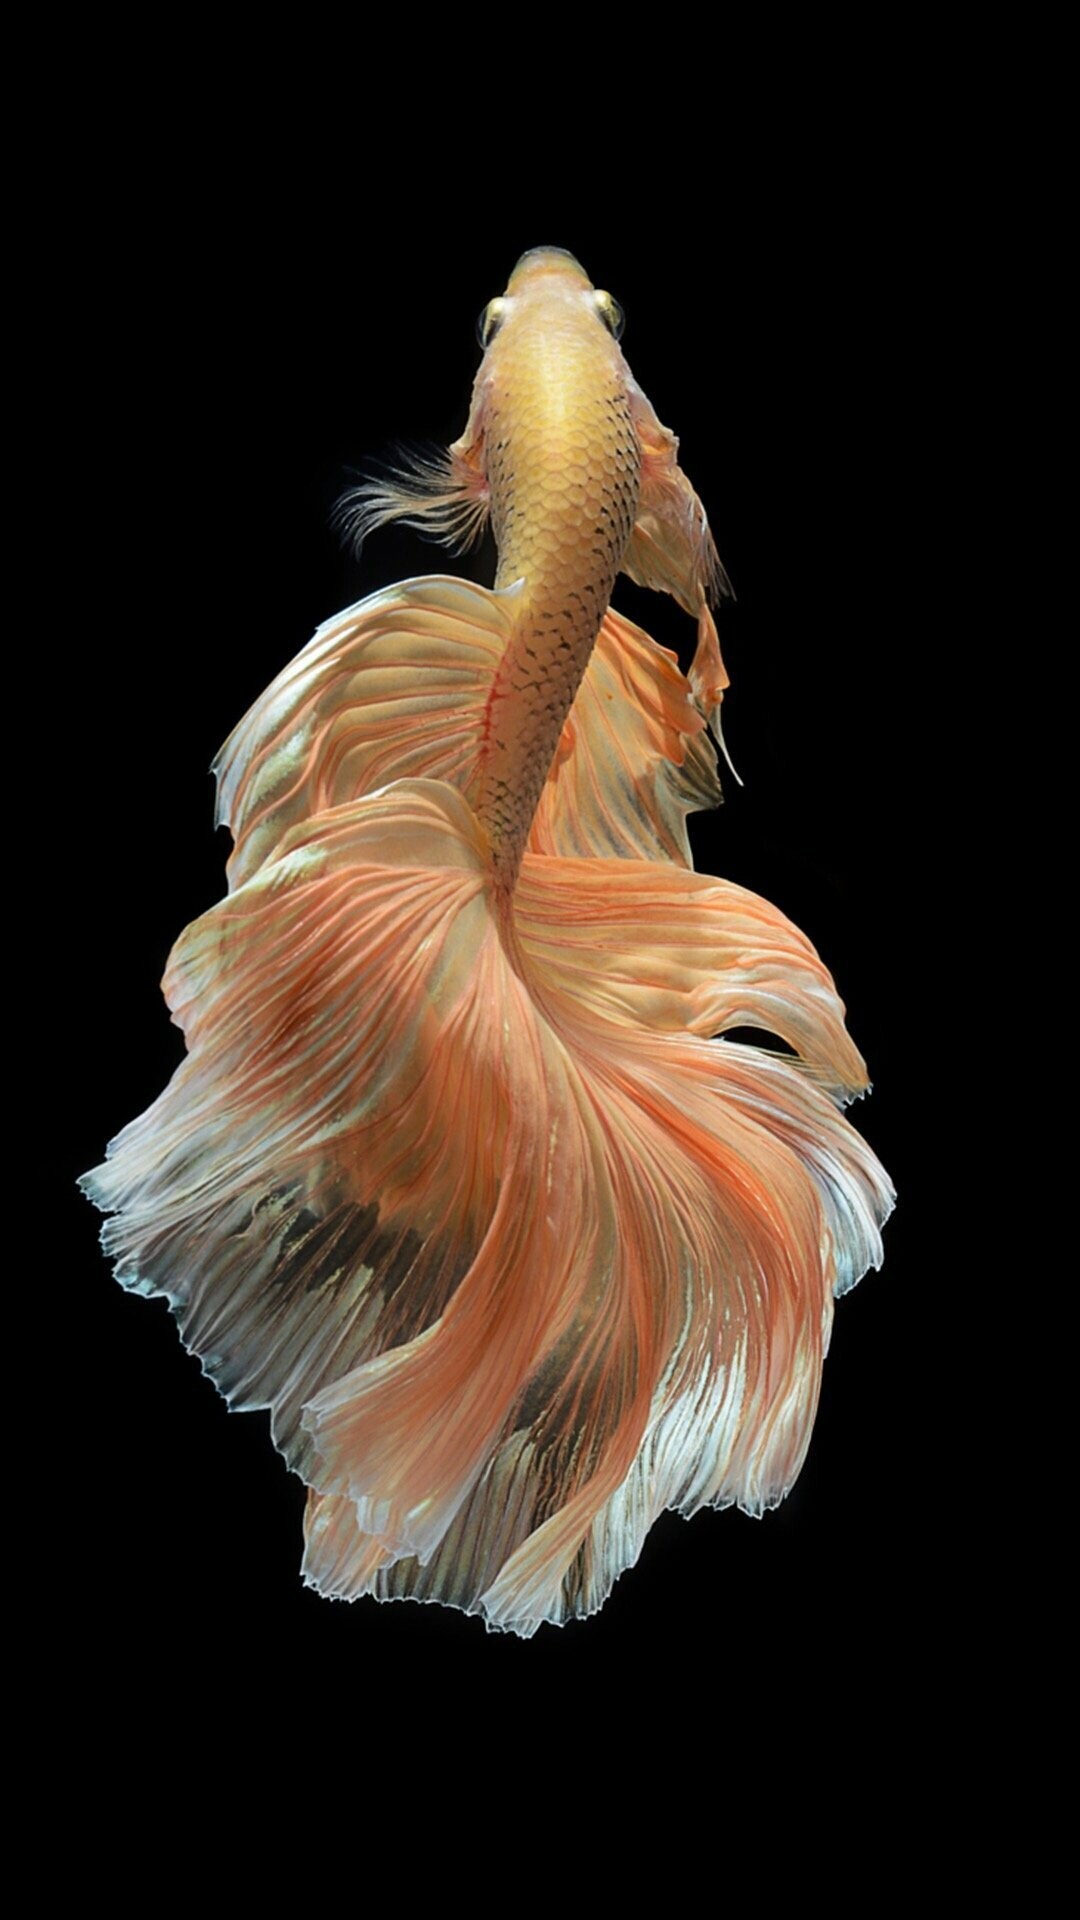 iPhone fish wallpapers, Stunning marine visuals, Free download, High-quality images, 1080x1920 Full HD Phone